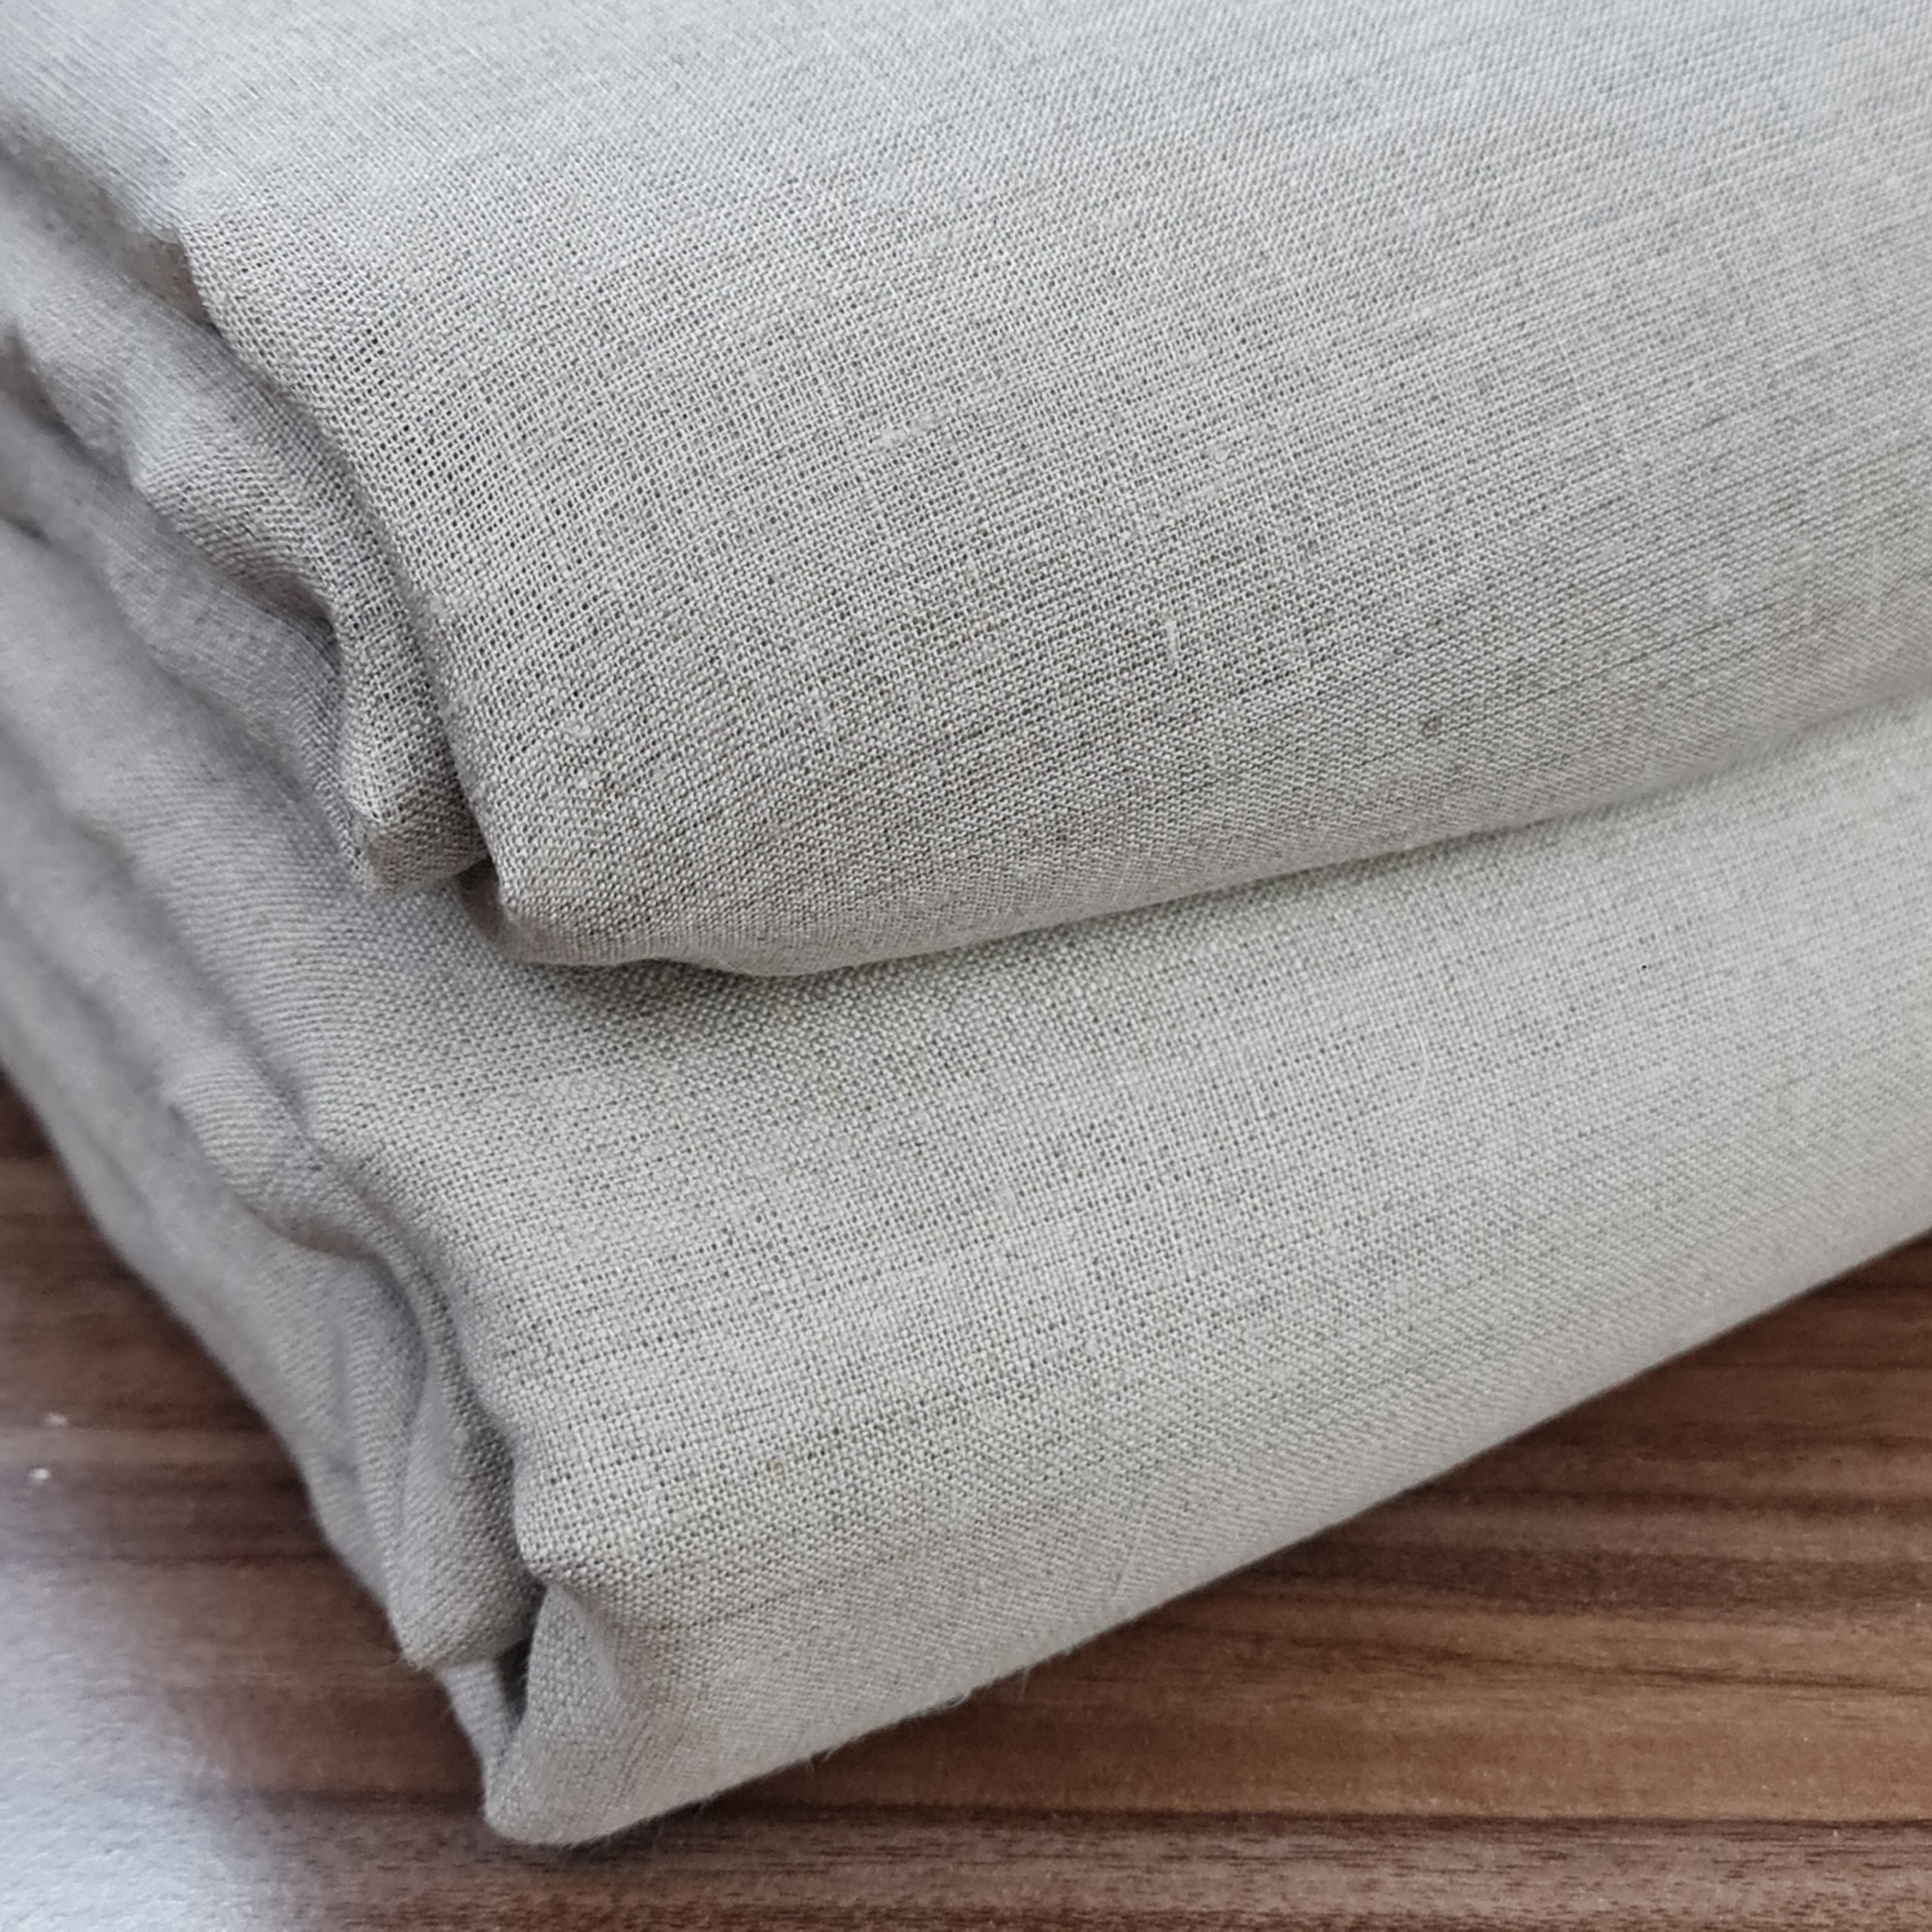 100% Pure 60 Natural Linen by the Yard, Medium and Heavy Weight Natural  Linen Fabric, Natural Linen Fabric for Sewing, Linen for Wedding 